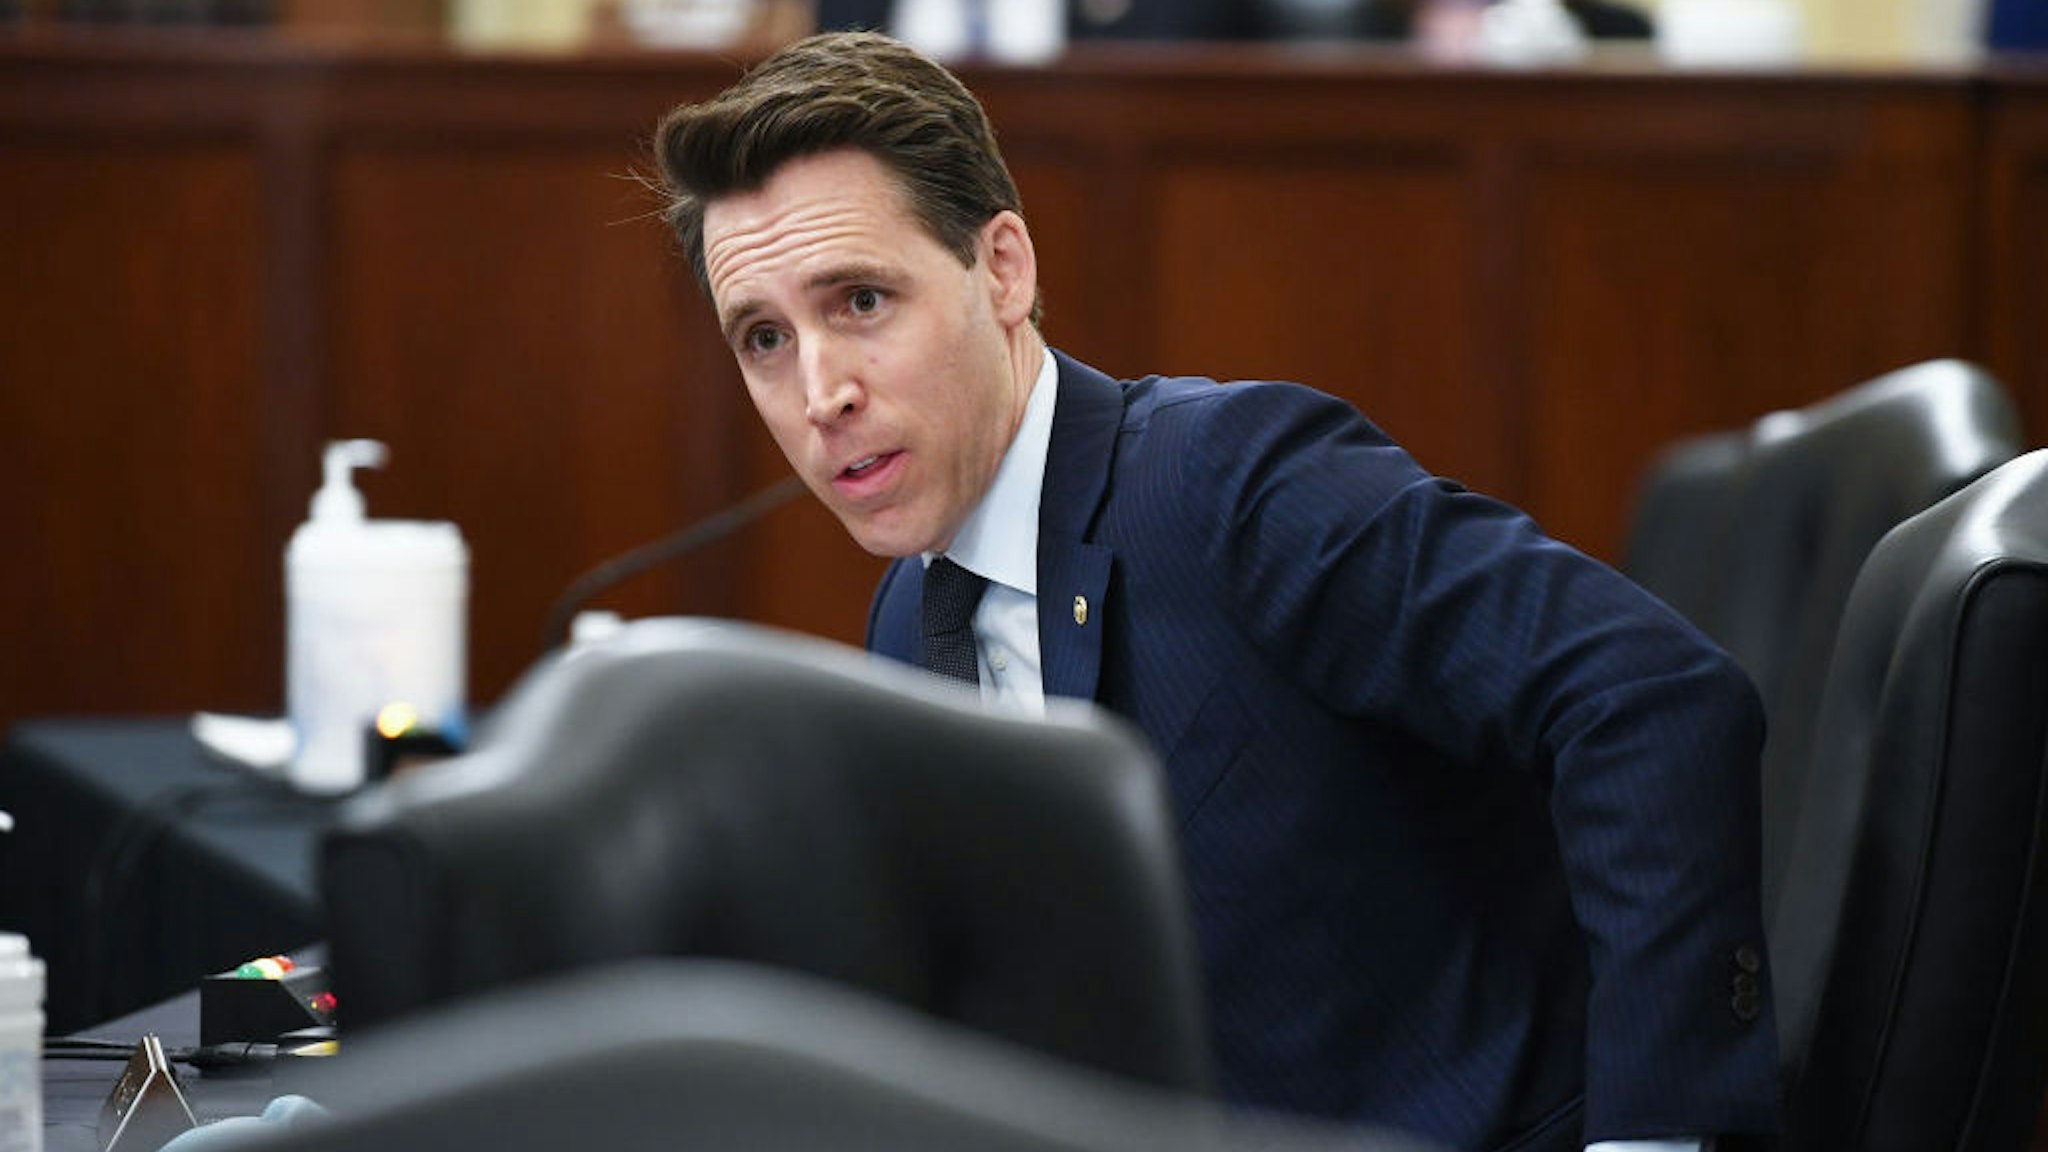 WASHINGTON, DC - JUNE 10: U.S. Sen. Josh Hawley (R-MO) speaks during the Senate Small Business and Entrepreneurship Hearings to examine implementation of Title I of the CARES Act on Capitol Hill on June 10, 2020 in Washington, DC. (Photo by Kevin Dietsch - Pool/Getty Images)